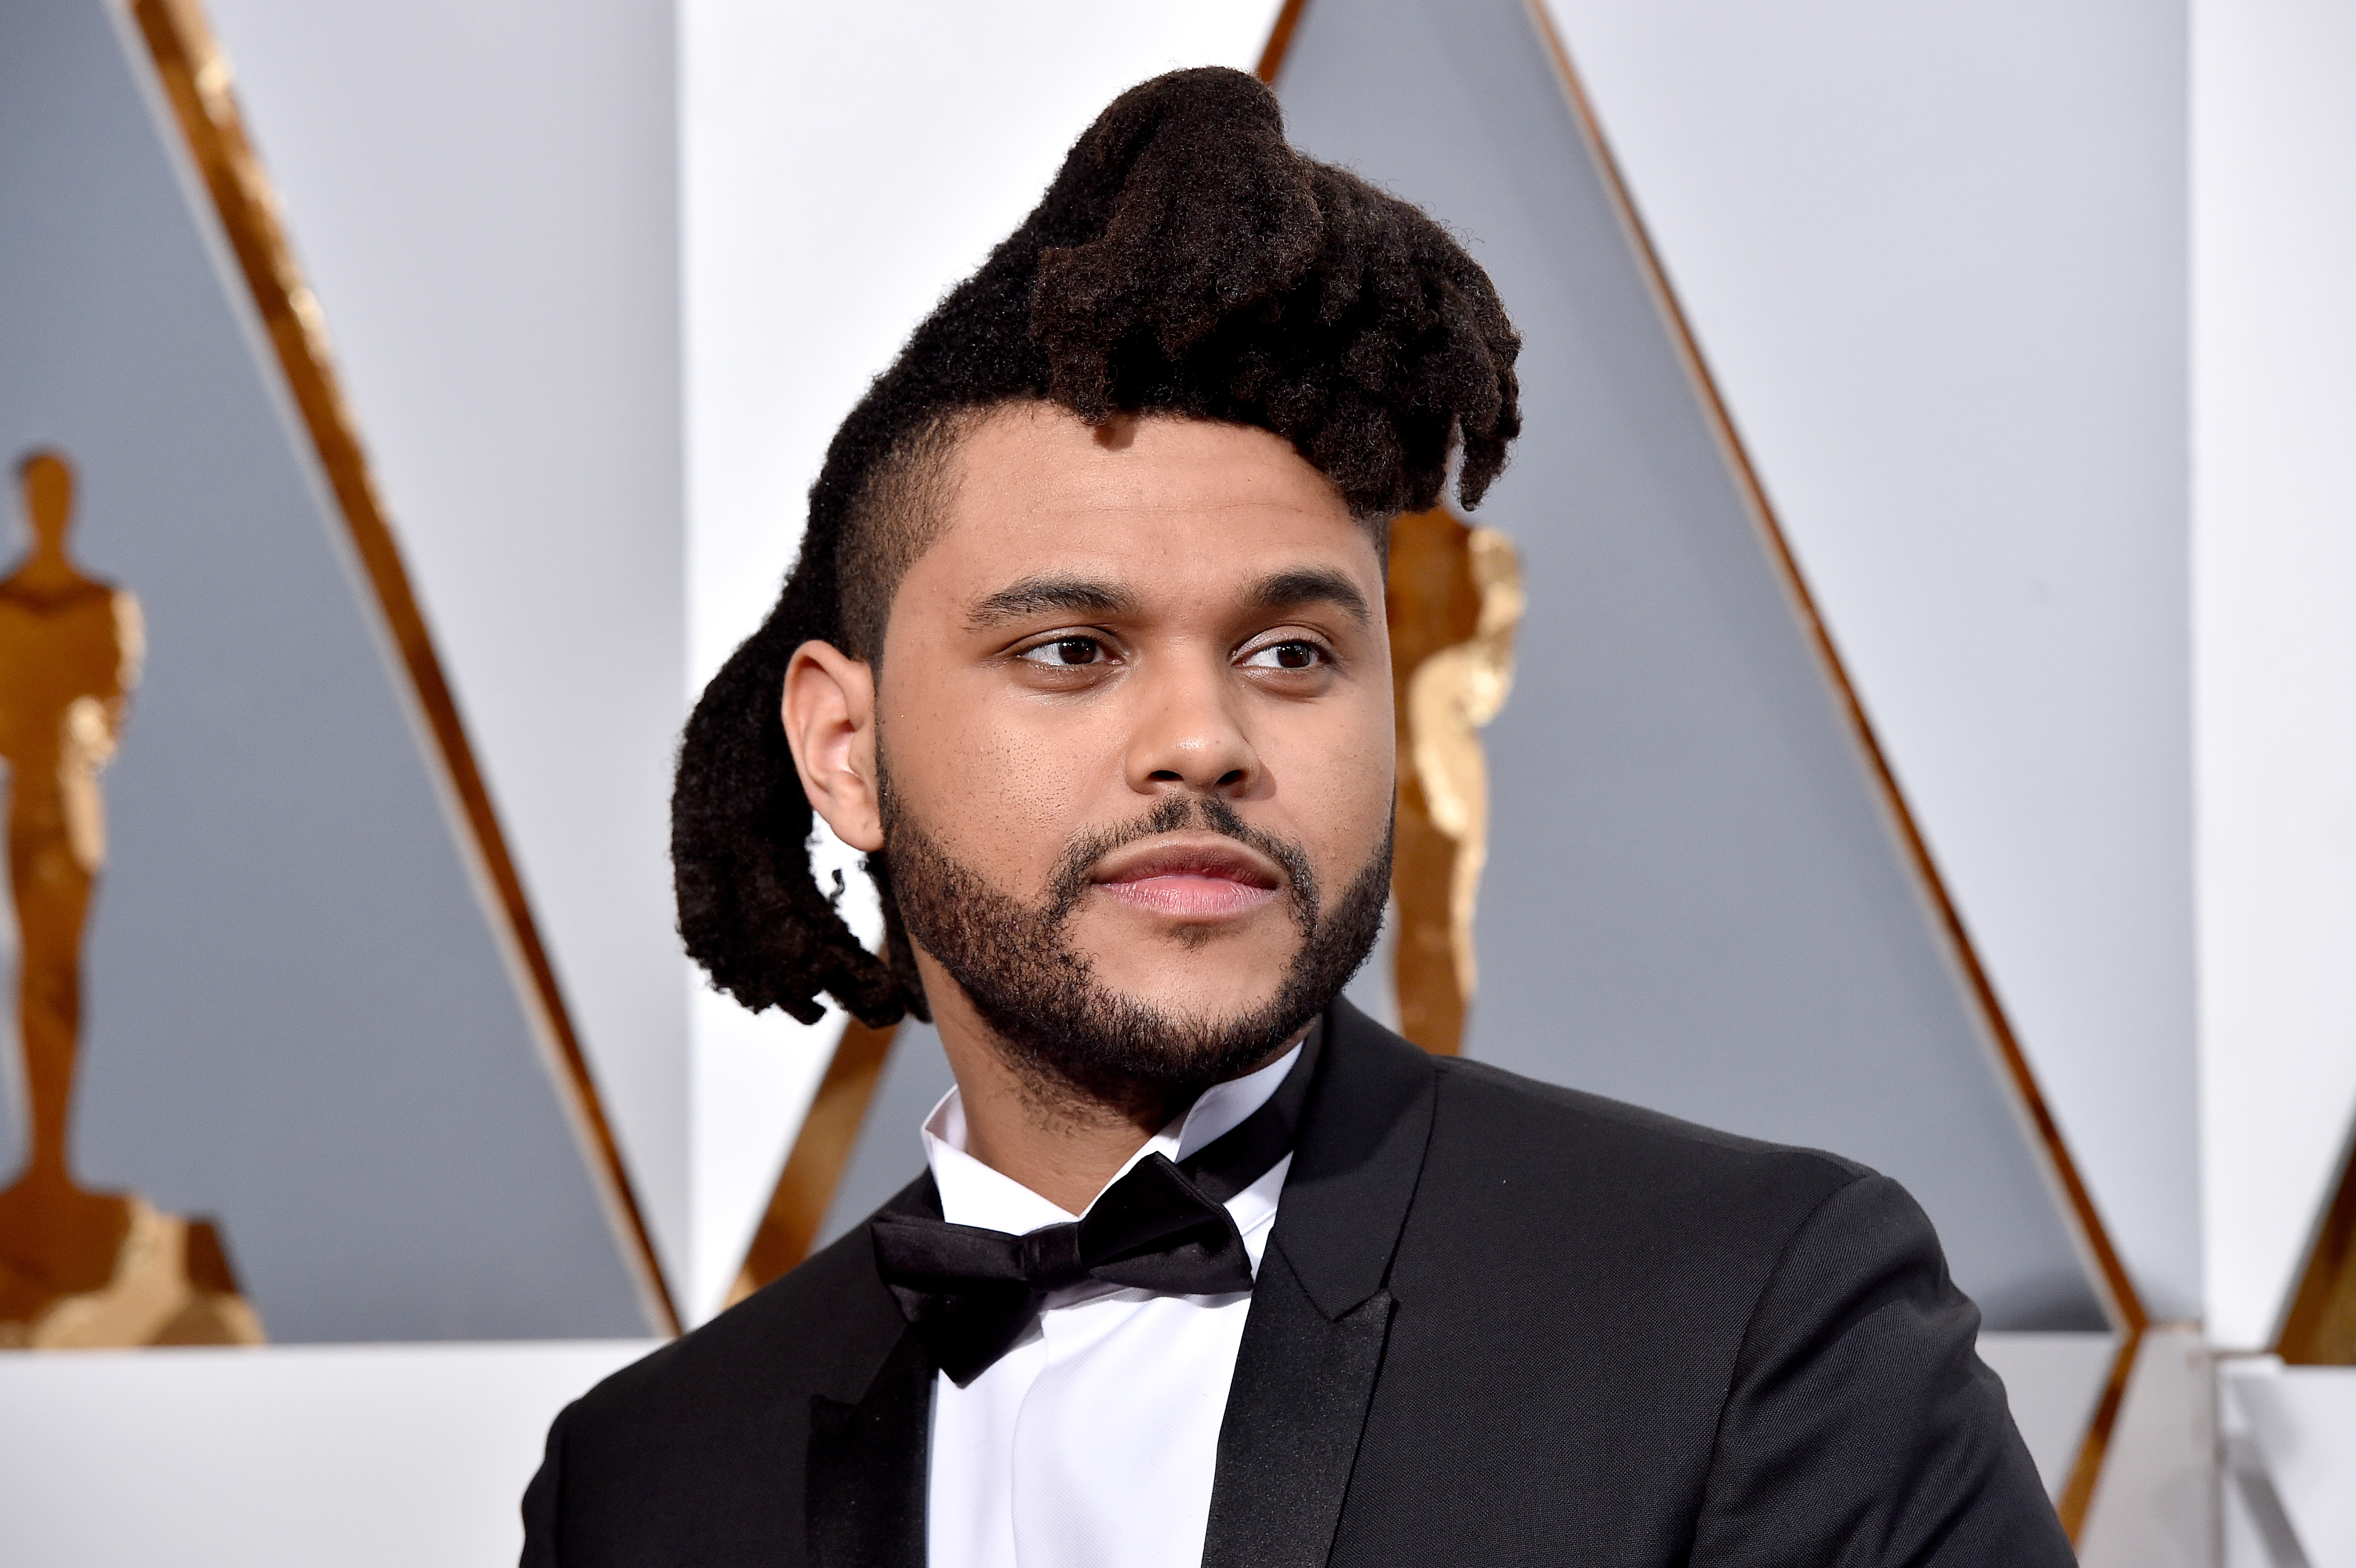 Recording artist The Weeknd attends the 88th Annual Academy Awards. (Photo by Kevork Djansezian/Getty Images)